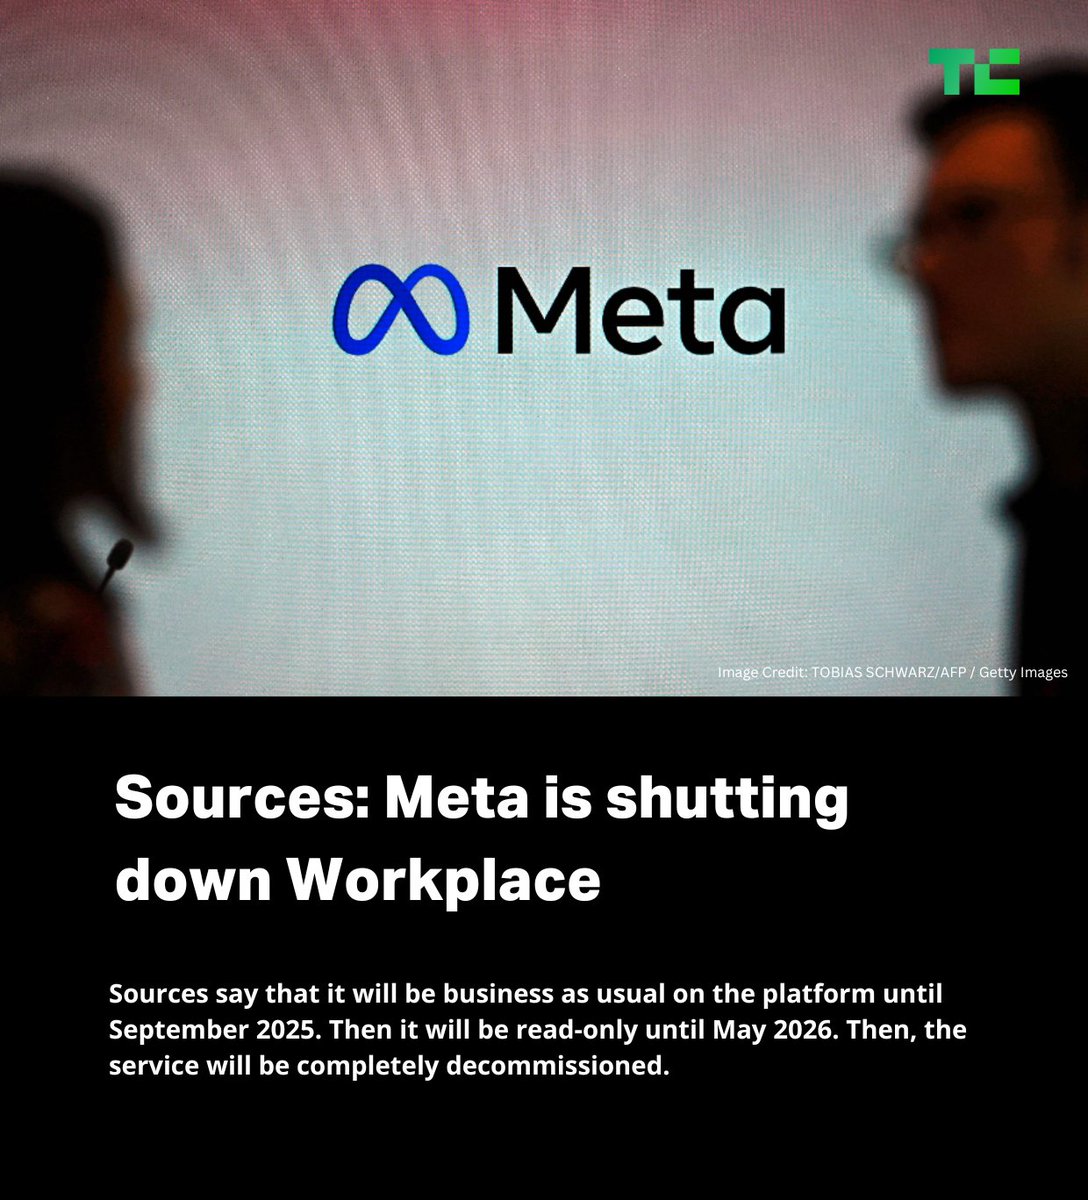 Exclusive: TechCrunch has learned that Meta is shuttering Workplace, a version of Facebook that had been built to enable communication among business teams and wider organizations.

Read more: tcrn.ch/44IFc6b